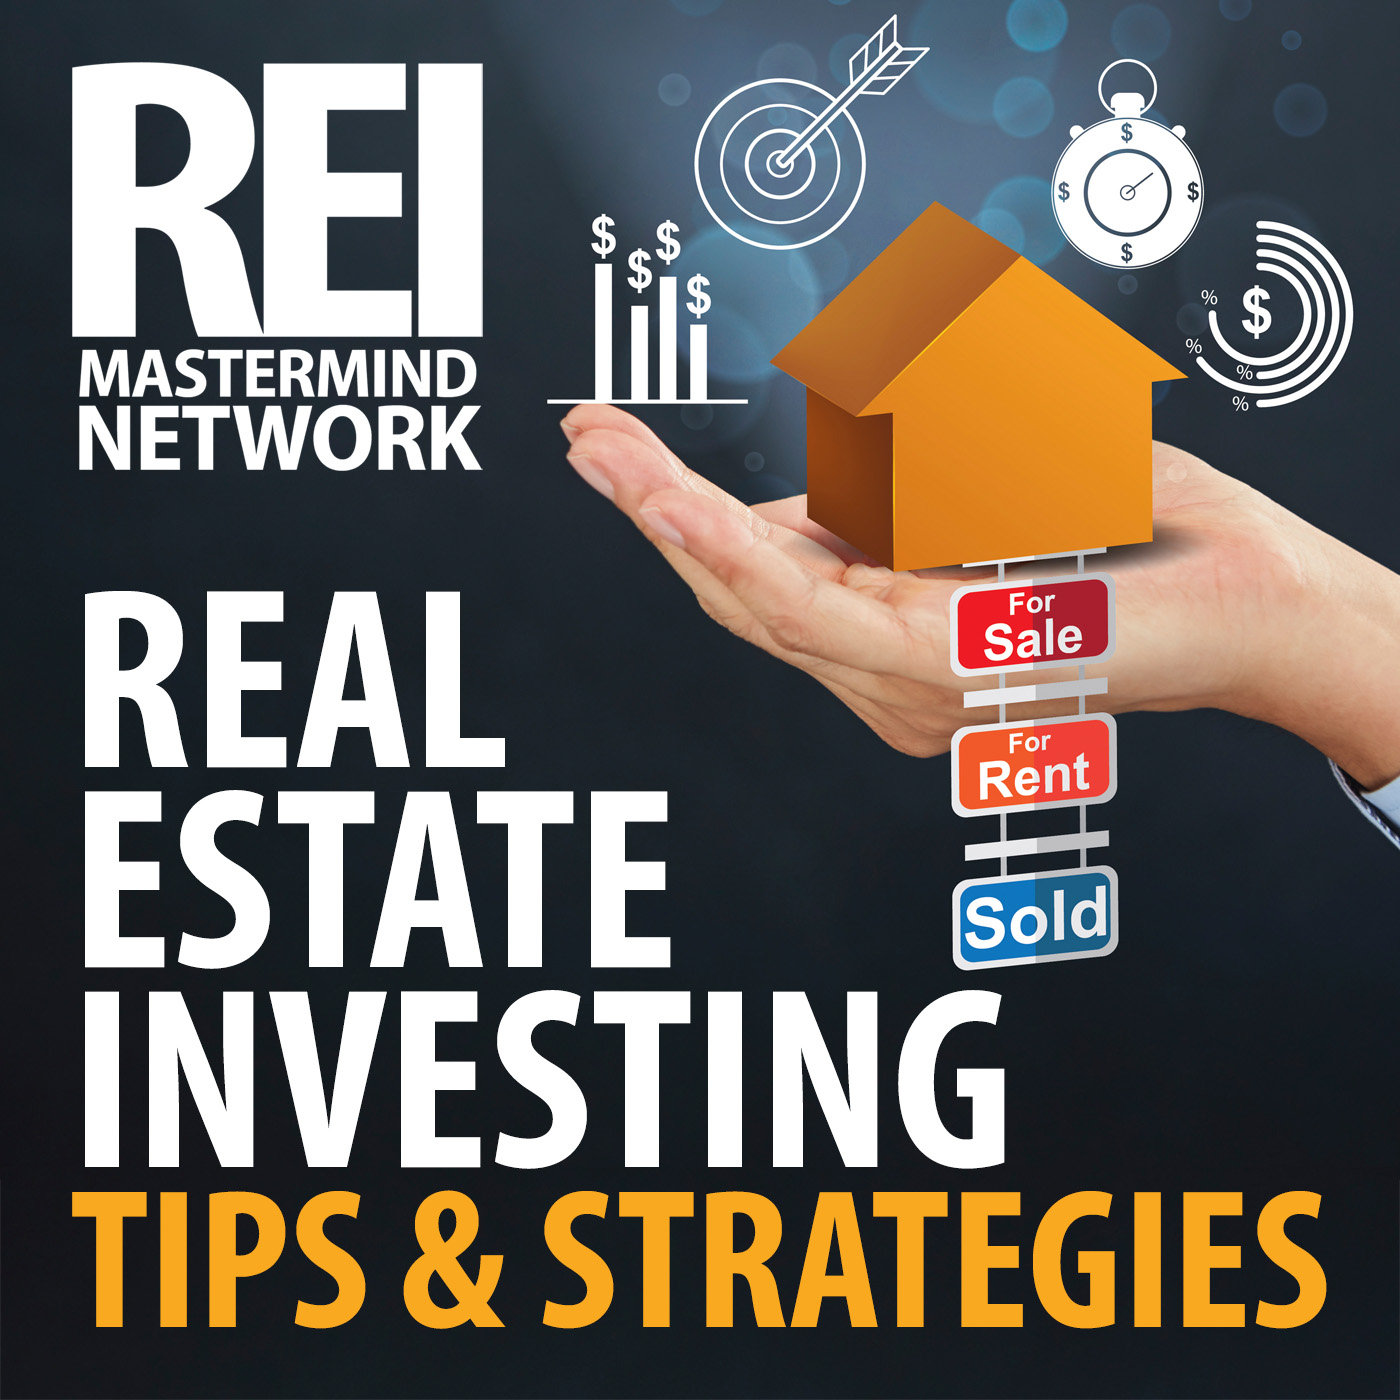 Is it worth negotiating commission with your Real Estate agent? Image